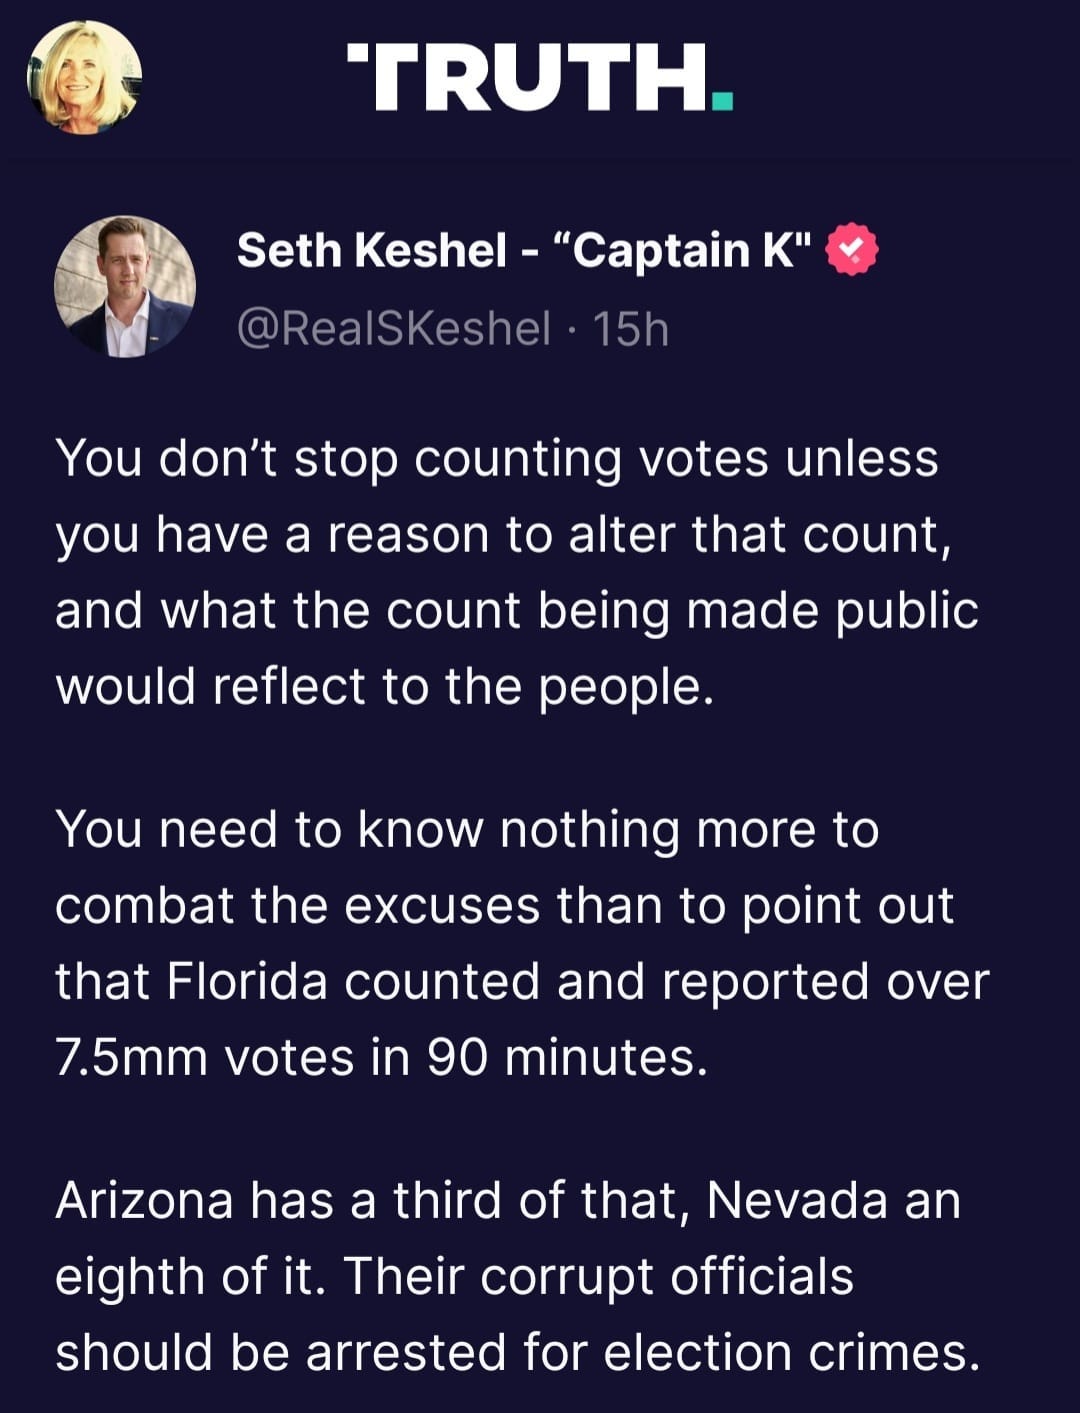 May be an image of 2 people and text that says 'TRUTH. Seth Keshel- "Captain K" @RealSKeshel 15h You don't stop counting votes unles you have a reason to alter that count, and what the count being made public would reflect to the people. You need to know nothing more to combat the excuses than to point out that Florida counted and reported over 7.5mm votes in 90 minutes. Arizona has a third of that, Nevada an eighth of it. Their corrupt officials should be arrested for election crimes.'